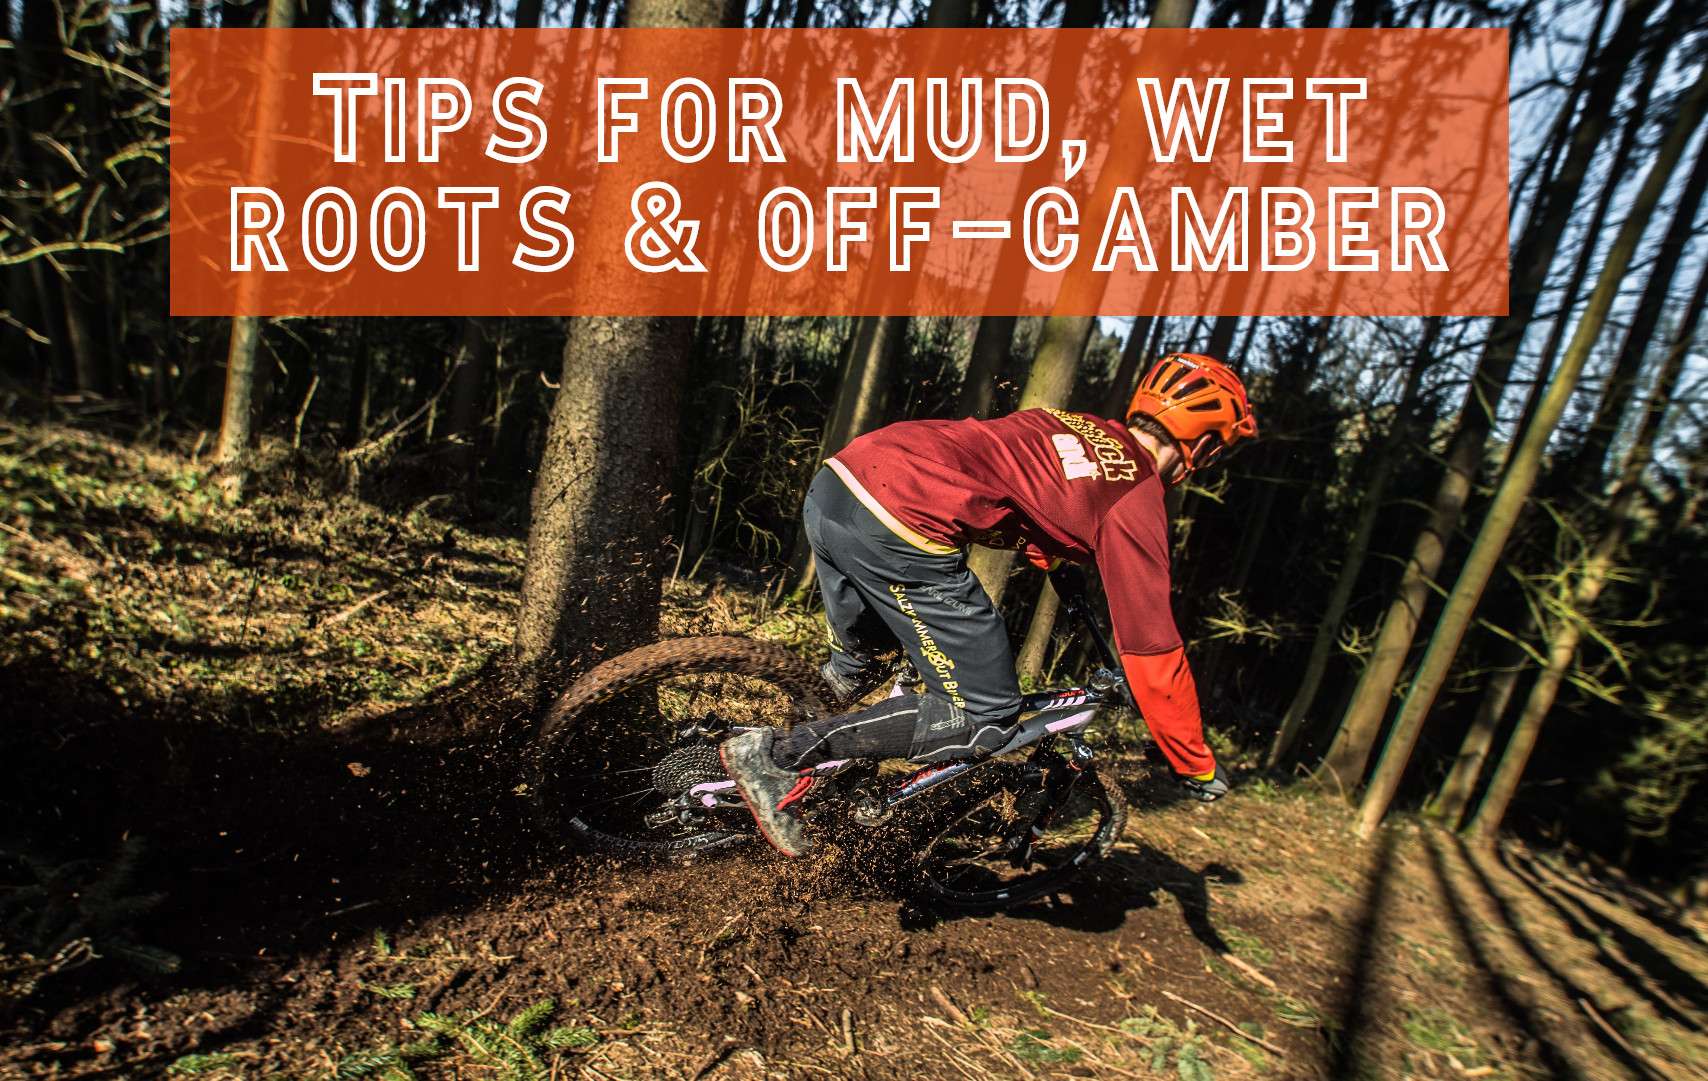 3 Pro MTB Tips for riding mud, wet roots, & off-camber